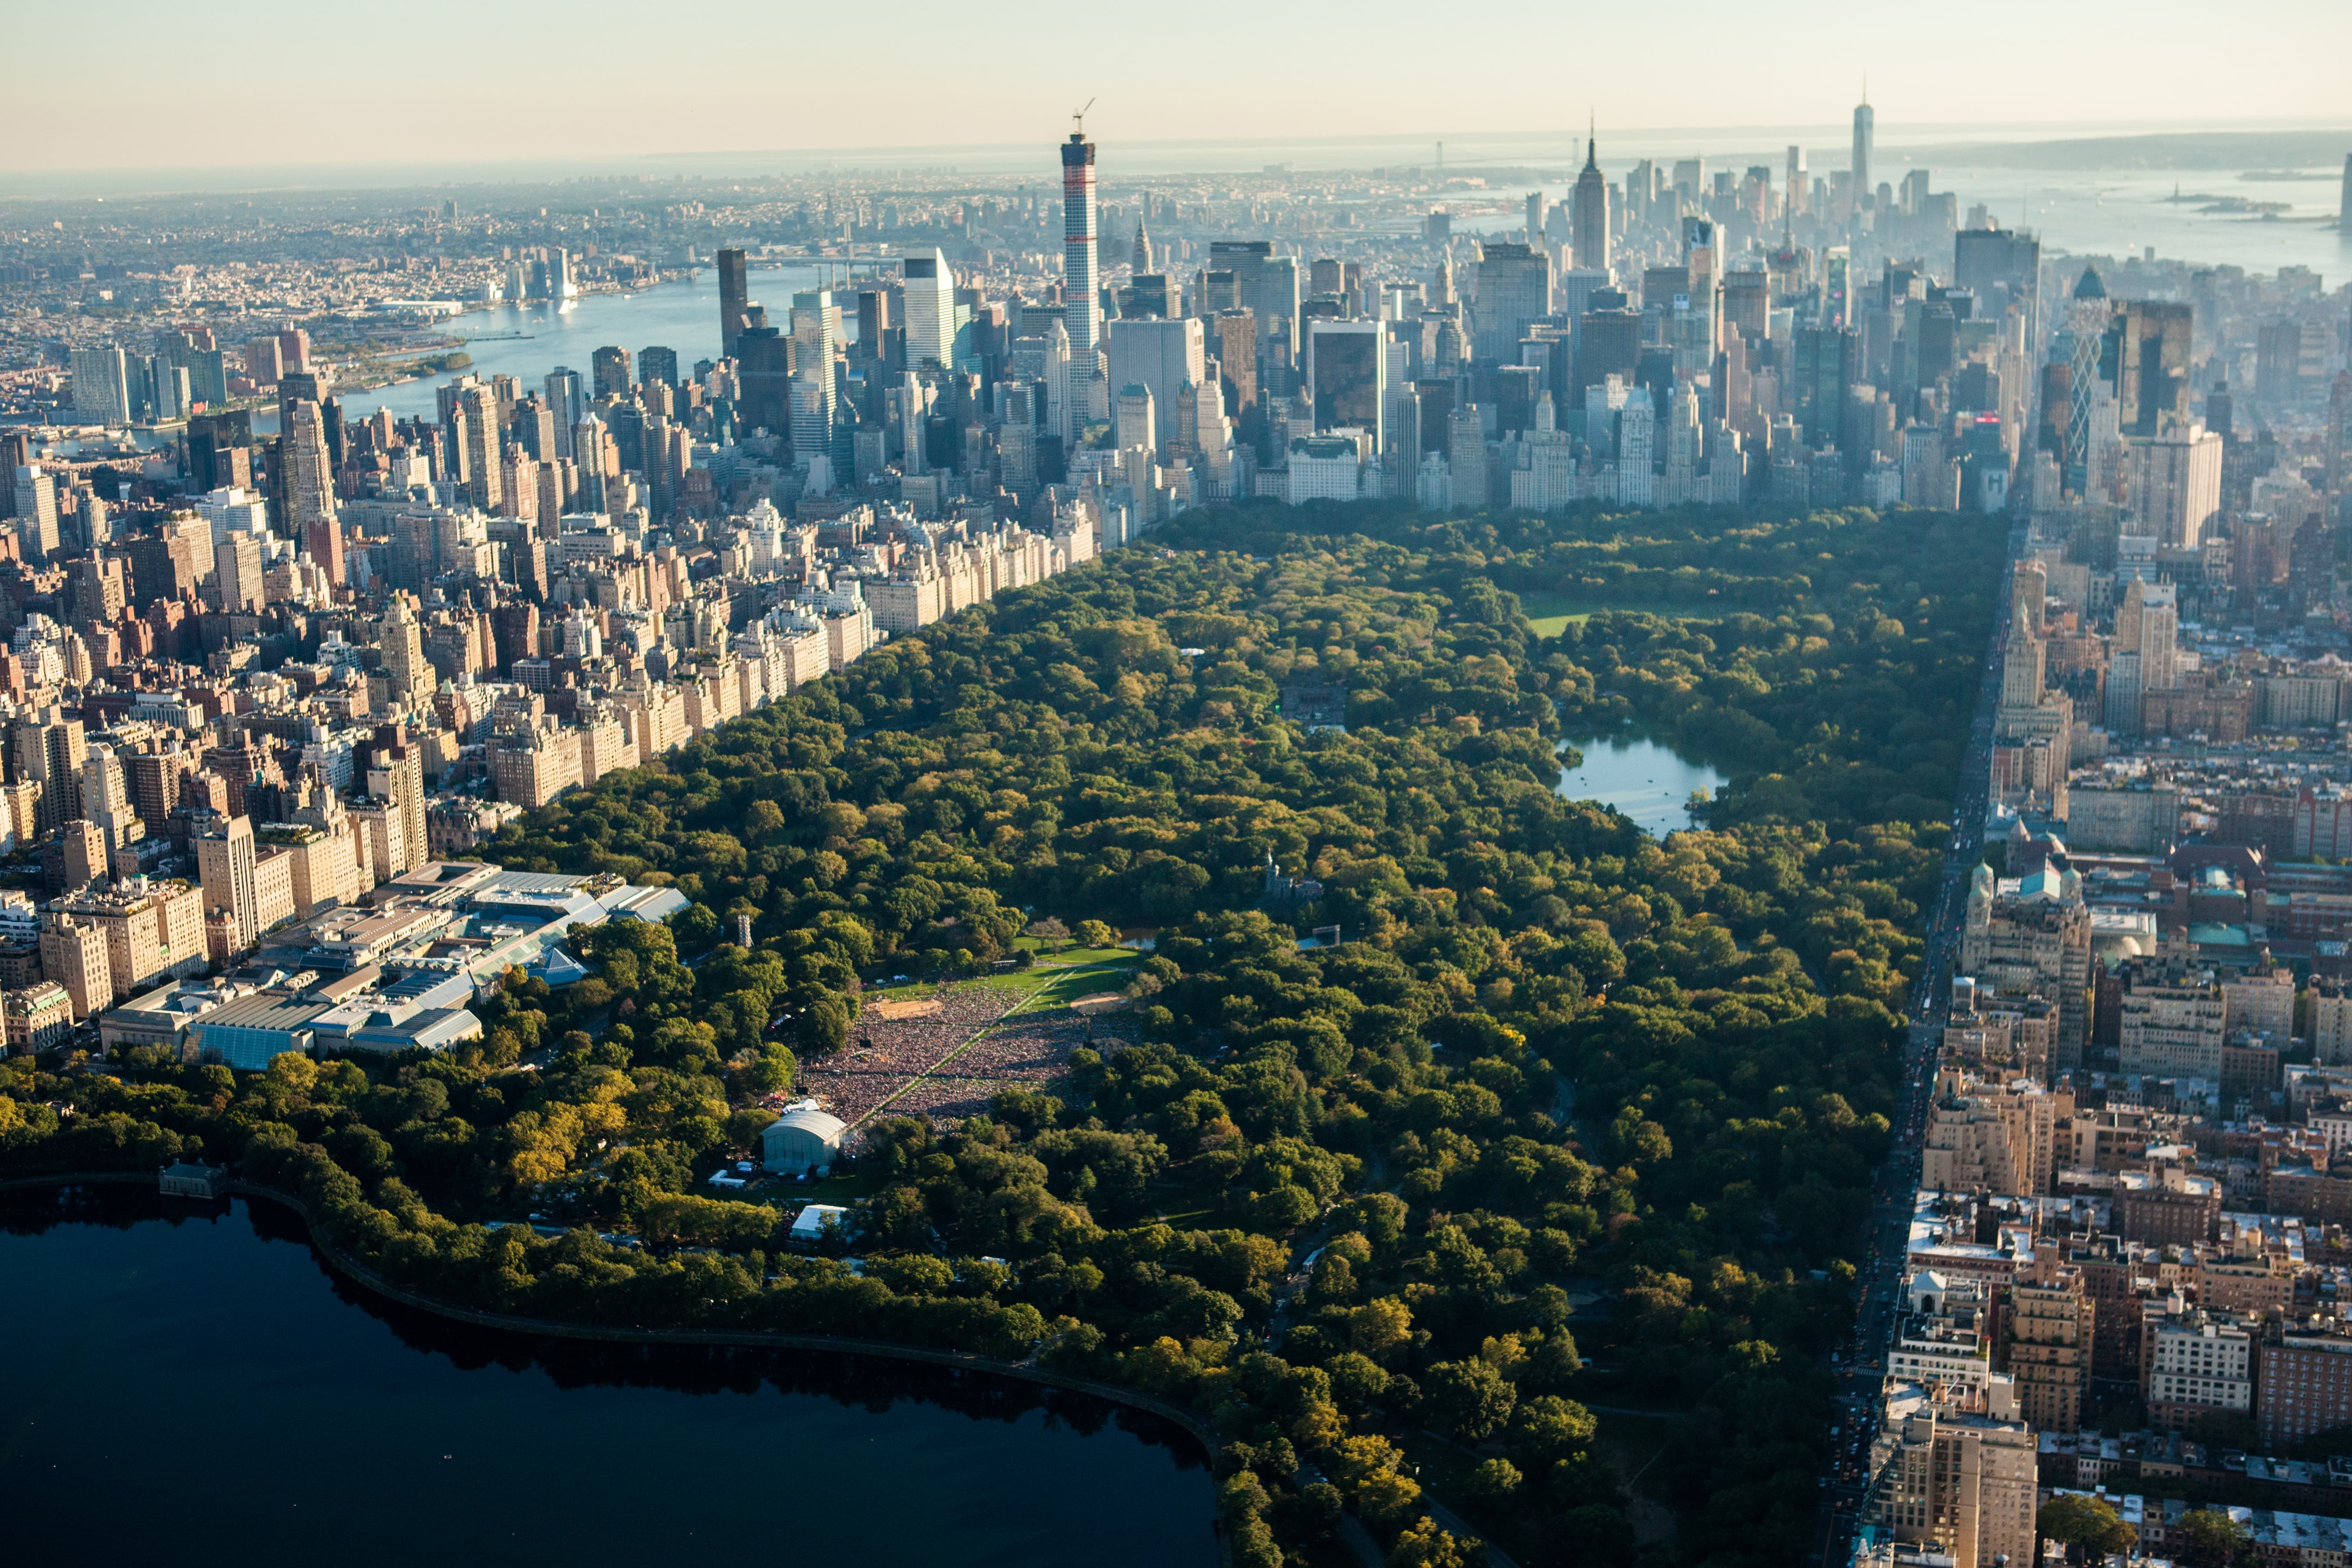 New York City's Central Park: The heart of the big apple